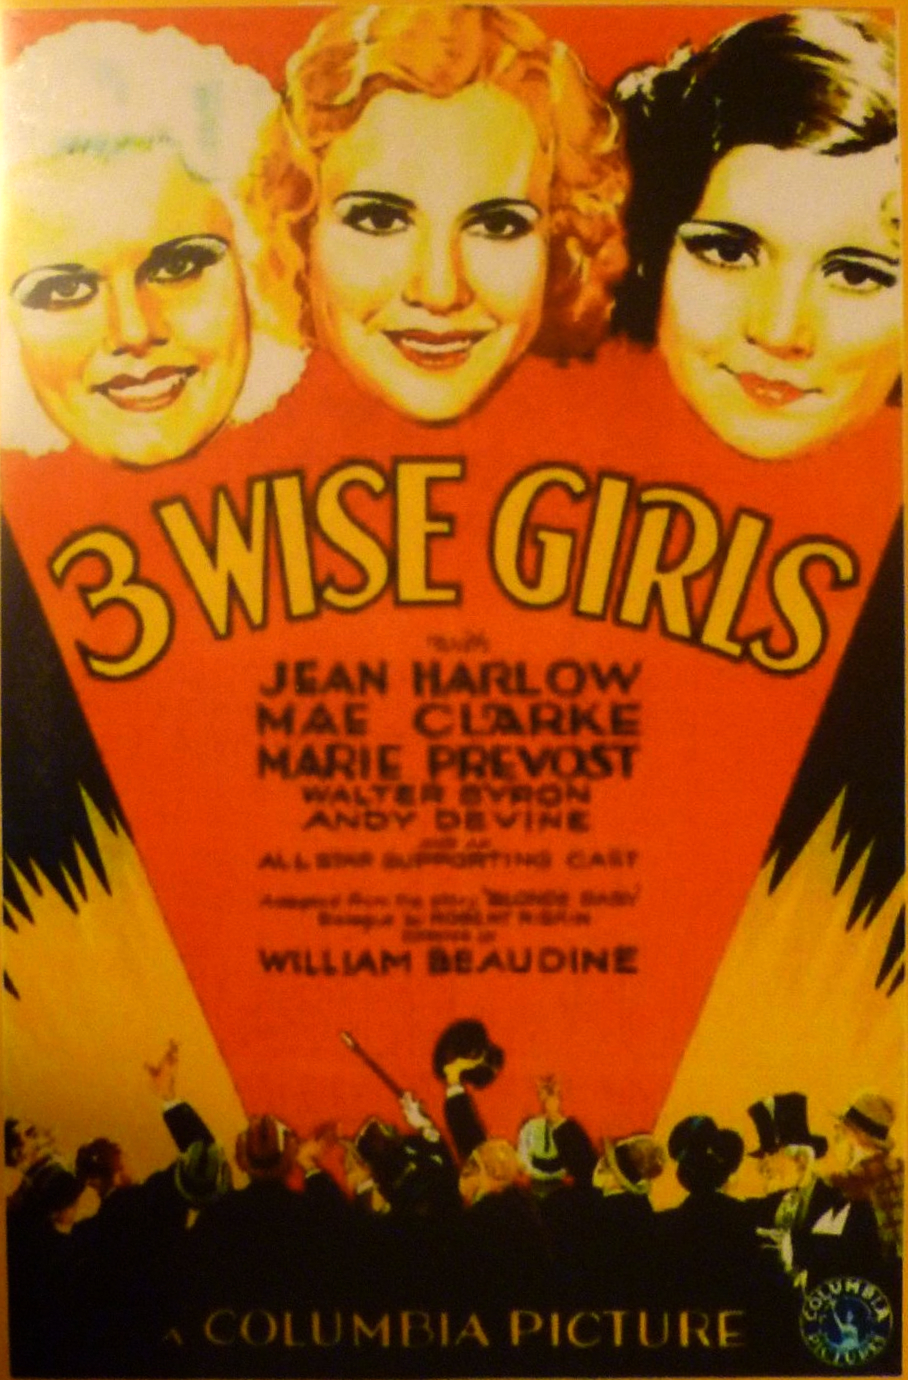 Jean Harlow, Mae Clarke and Marie Prevost in Three Wise Girls (1932)